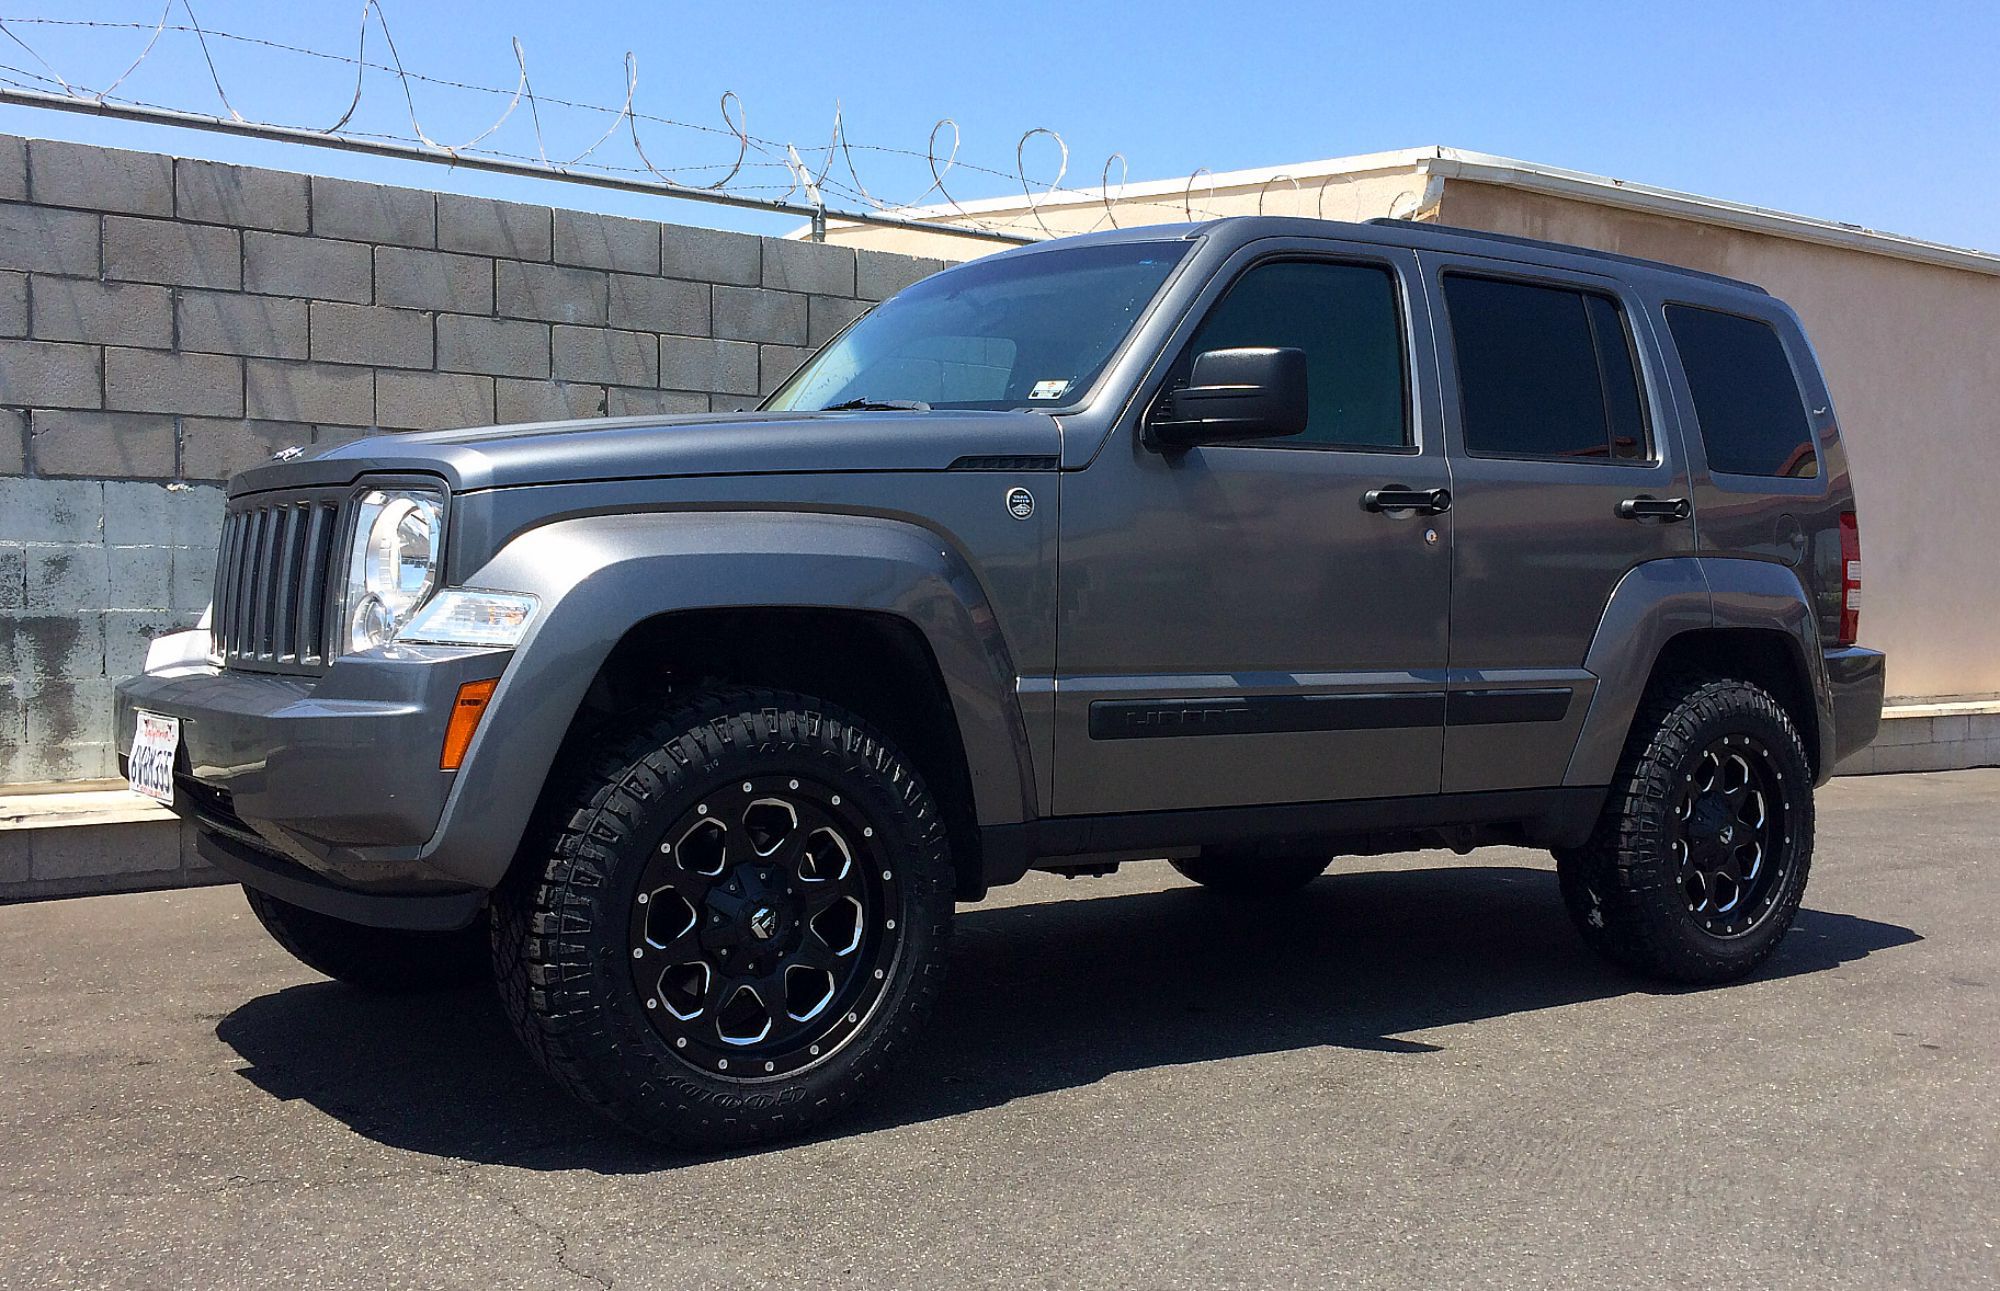 Lifted 2012 Jeep Liberty Sport 4x4 with 3.5" Superlift, 32" Goodyear  Wrangler Duratracs, 18x8" satin black Fuel wheel… | Jeep liberty, 2012 jeep,  Jeep liberty sport